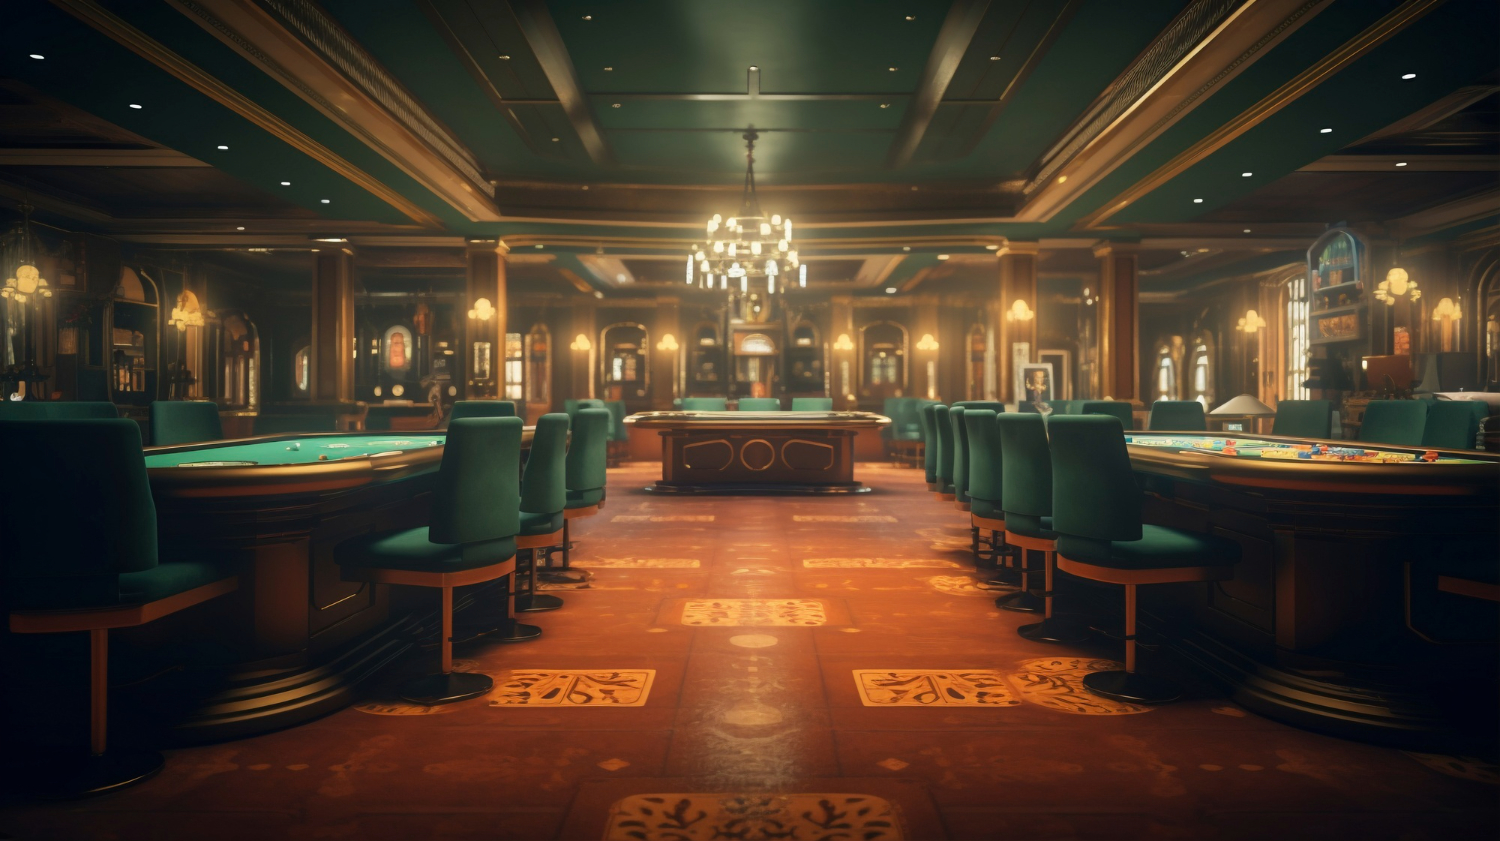 An elegant and empty casino interior with gaming tables and chairs under chandelier lighting.